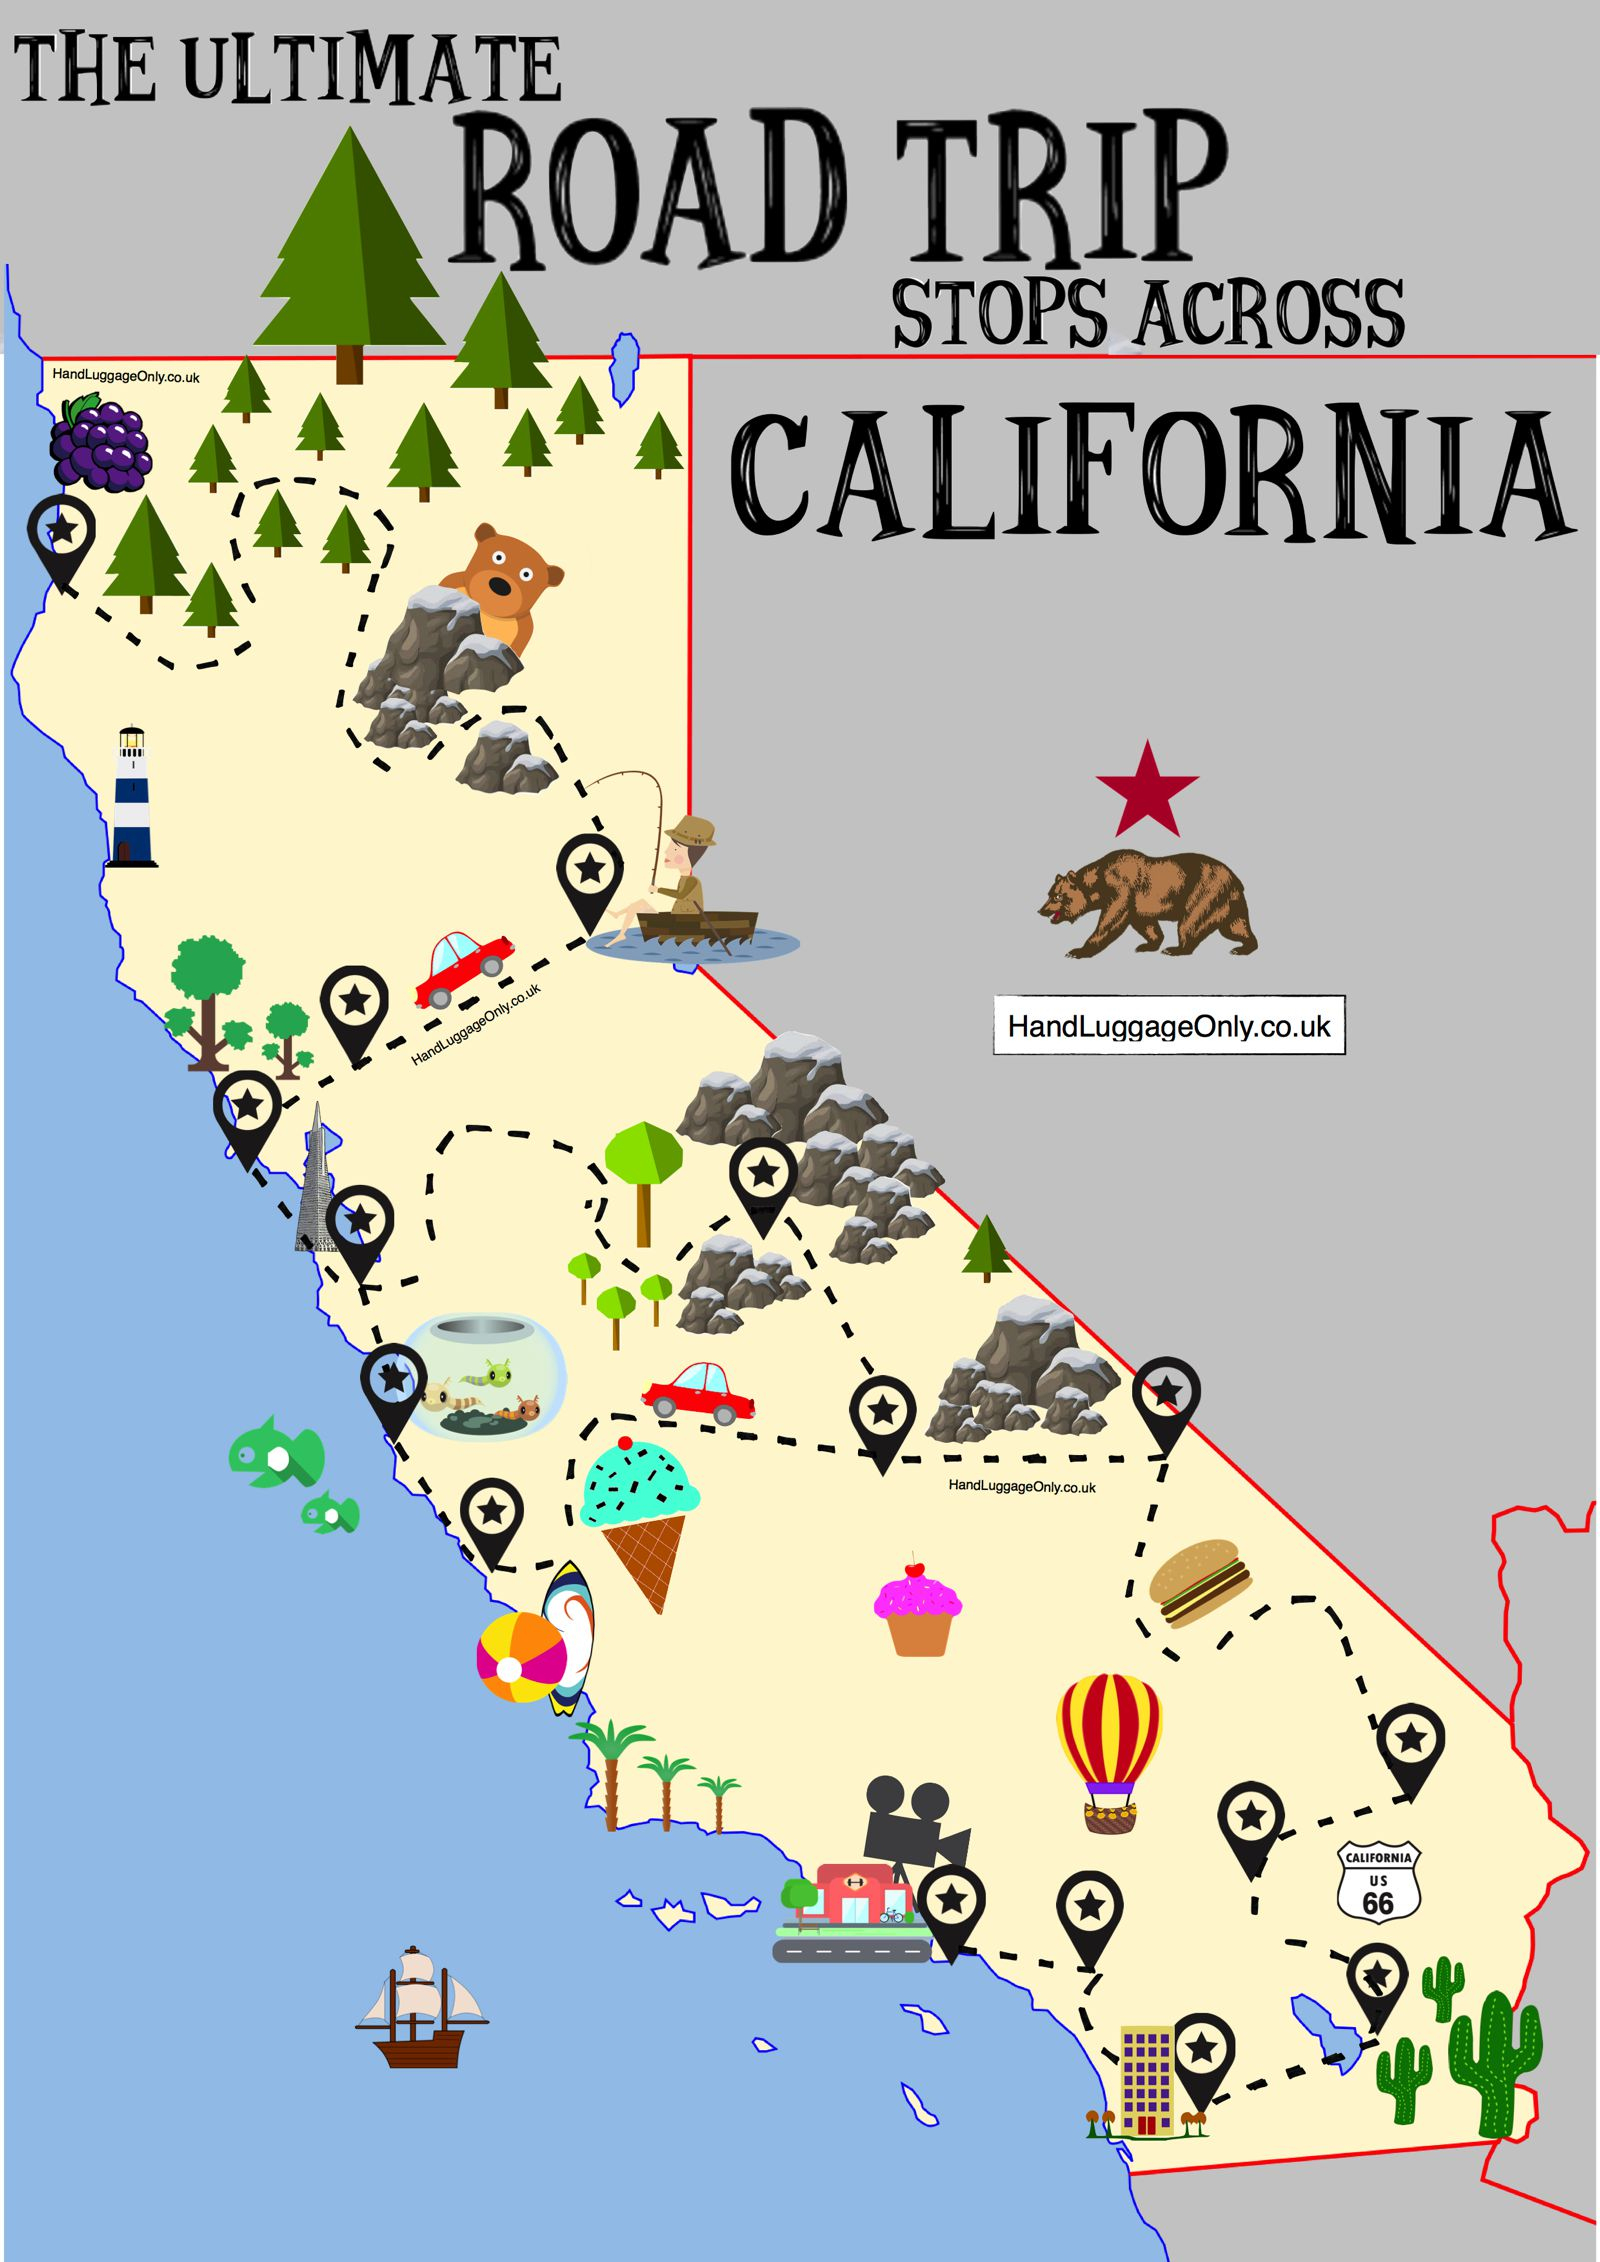 The Ultimate Road Trip Map Of Places To Visit In California - Hand - Map Of Hwy 1 California Coast